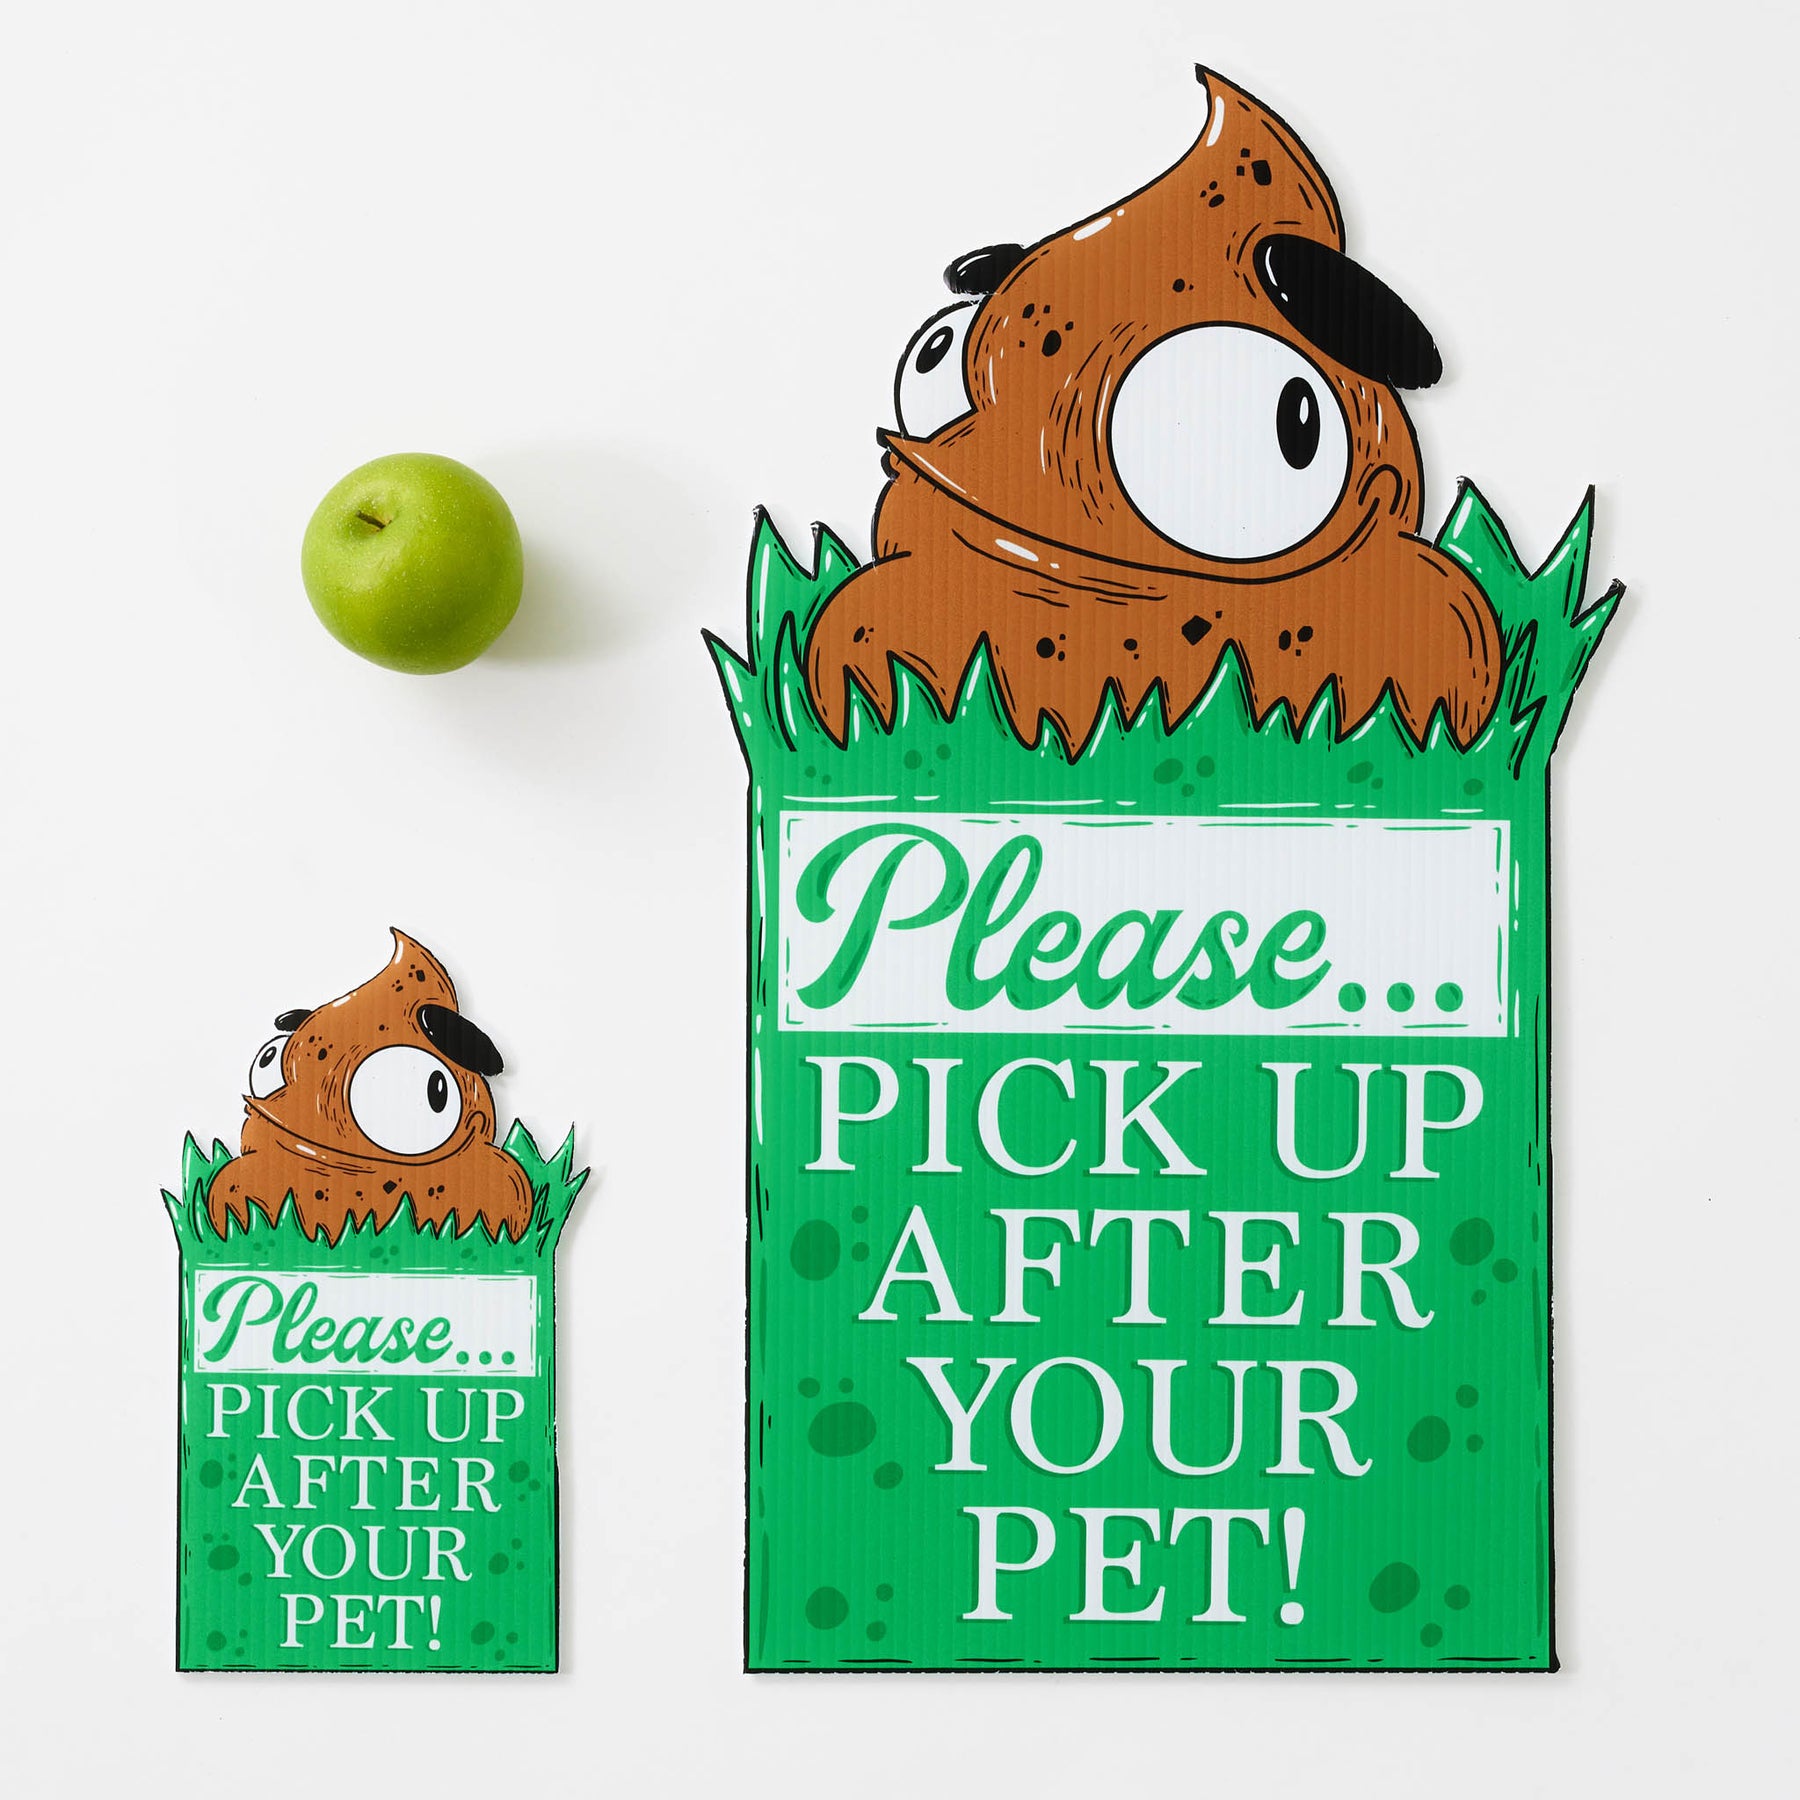 The Stranger | "Pick Up After Your Pet" Yard Sign